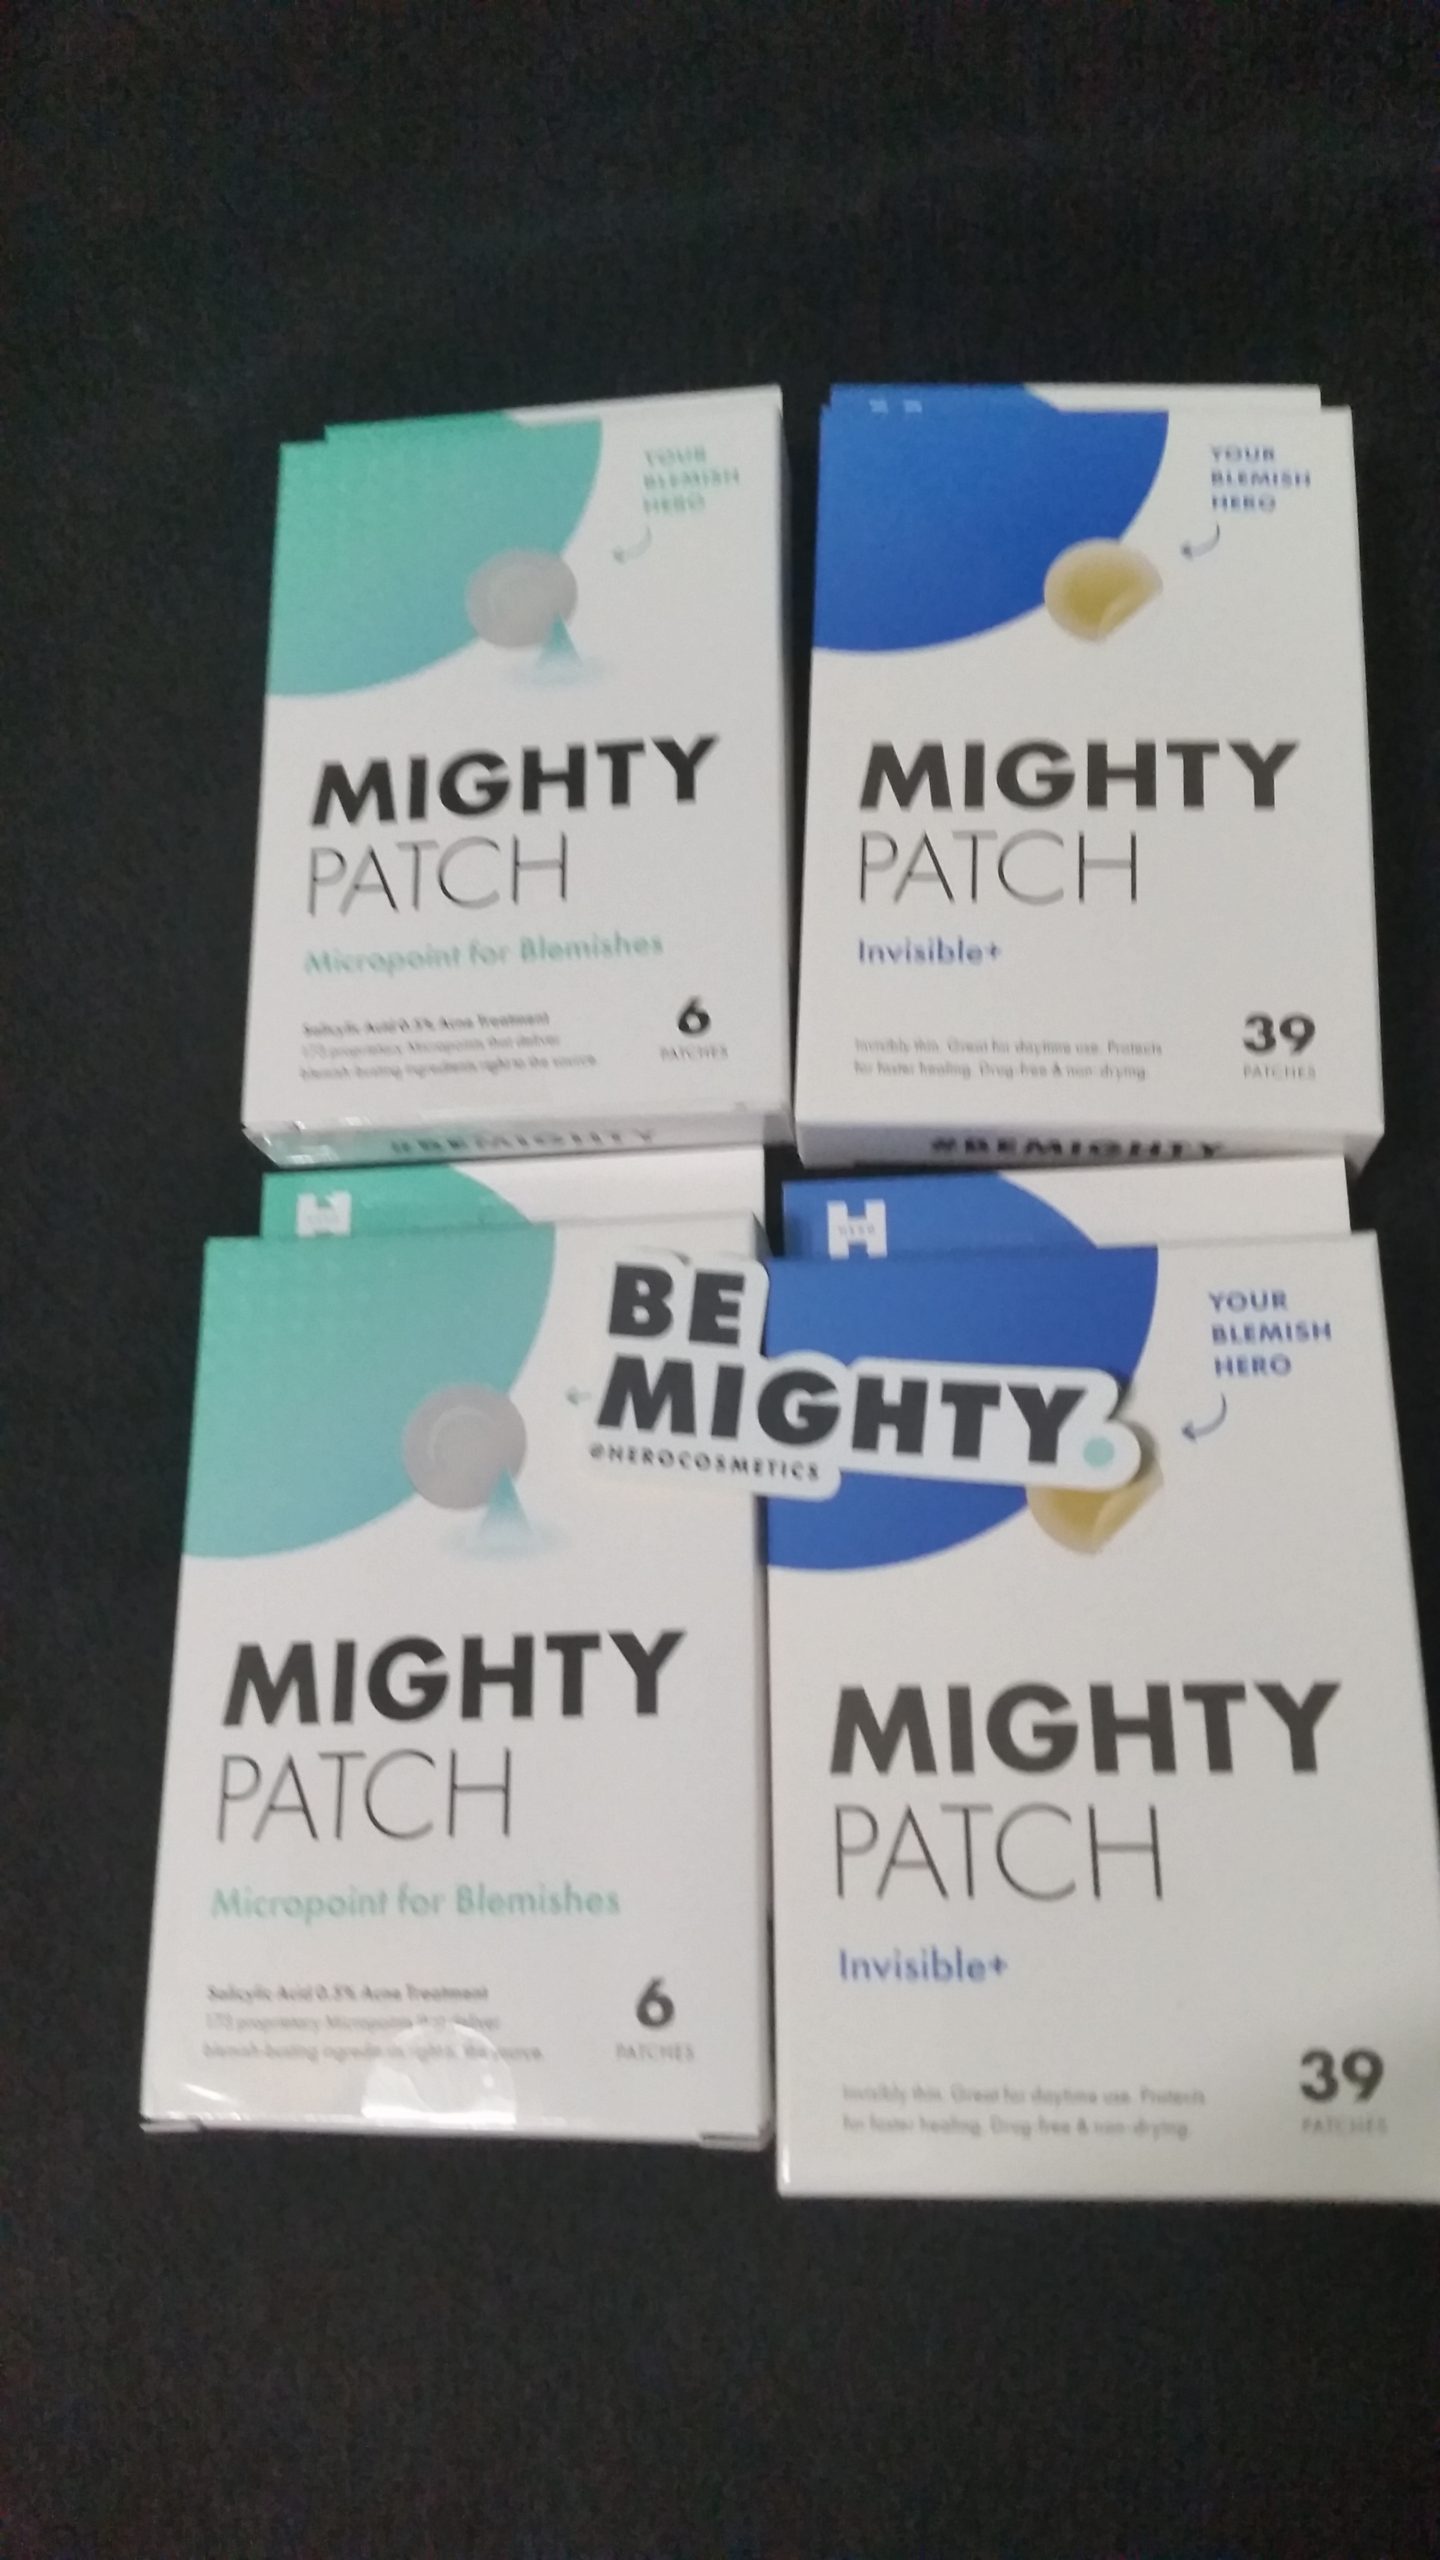 Be mighty sticker- 2 boxes of Mighty patch Invisible (blue corner box) - 2 boxes of Mircopoint Mighty Patch (mint cornered box)